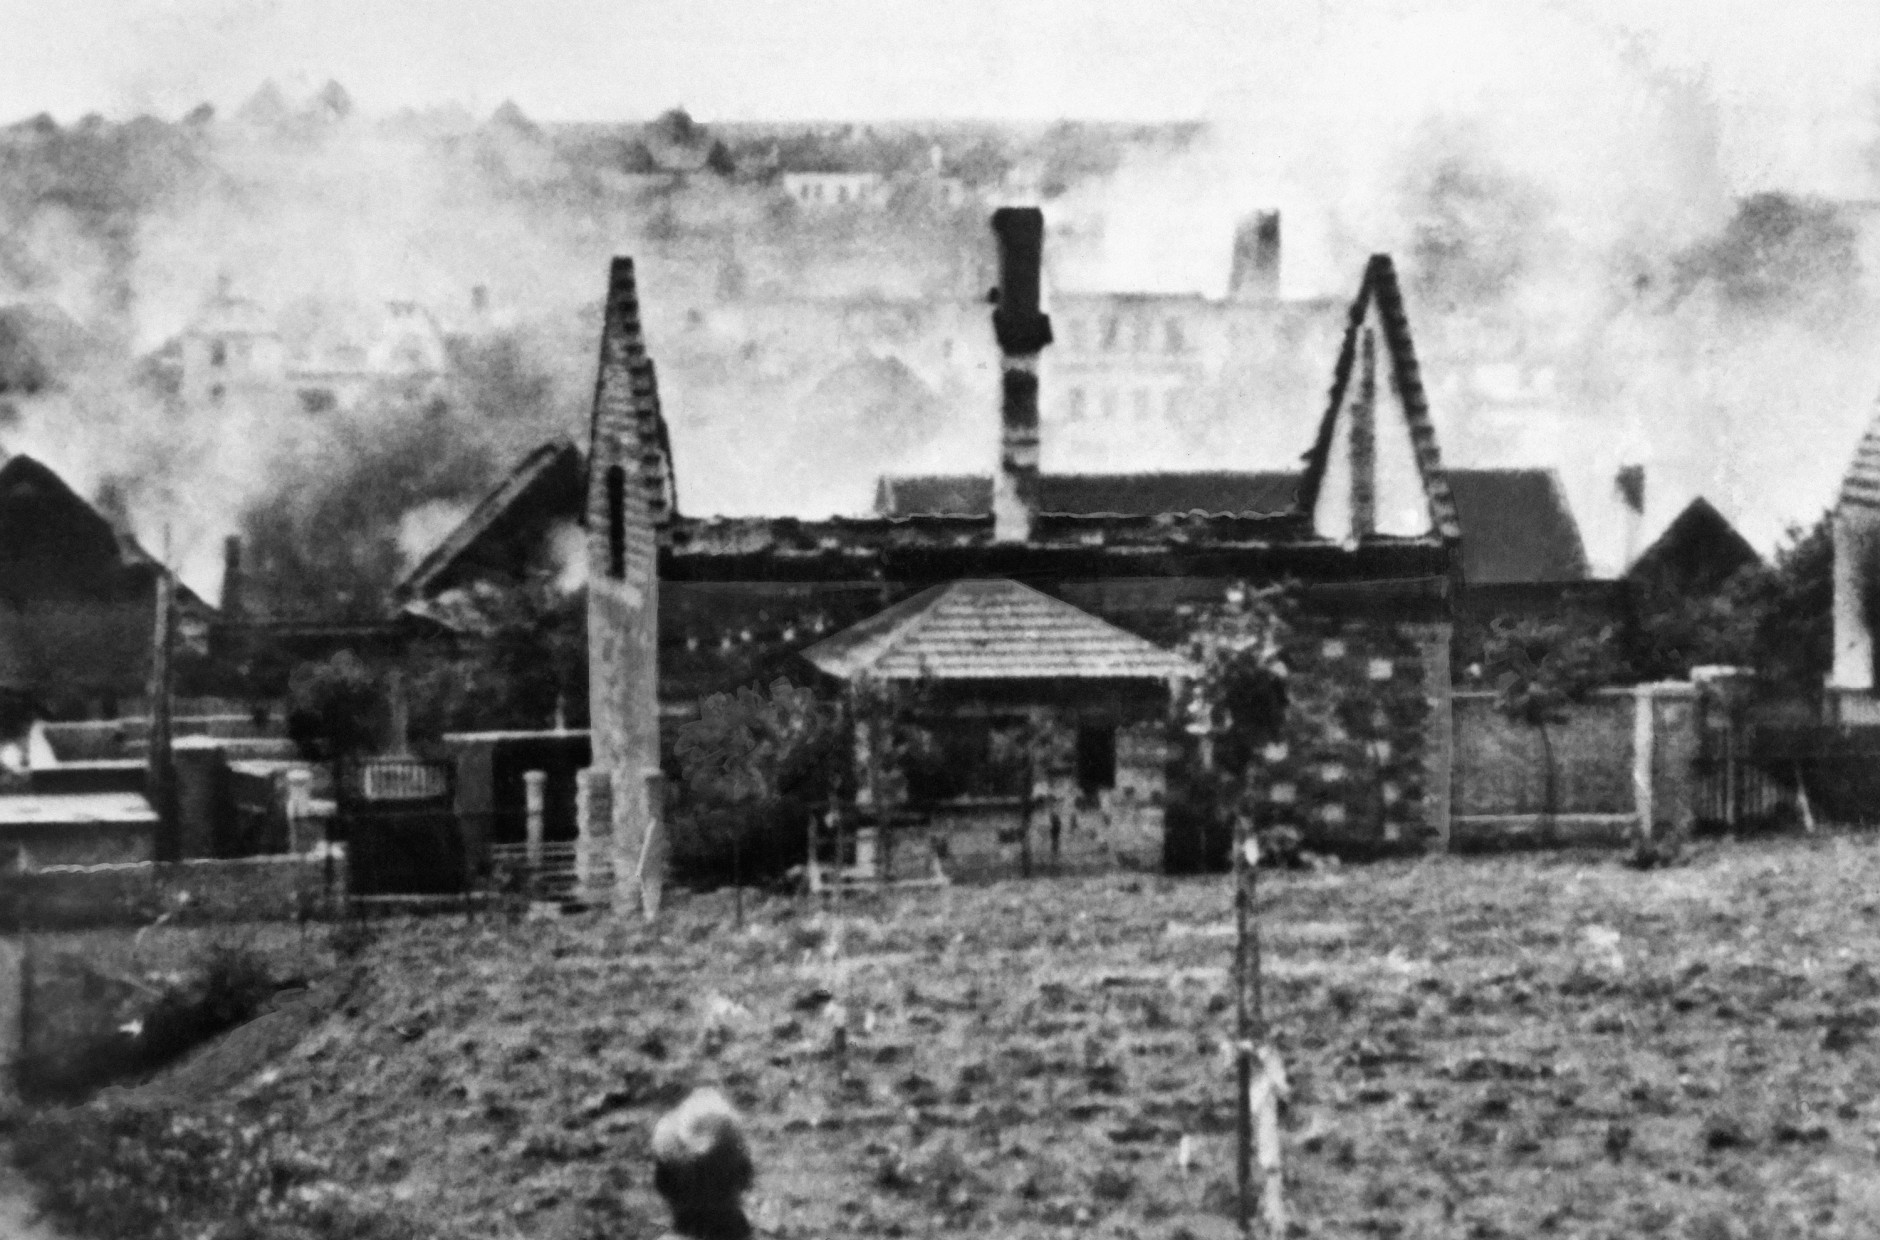 Lidice, Czechoslovakia on June 10, 1942, as the village of Lidice was burned to the ground. The destruction of the village was a bid by the Germans to root out a group of Czech resistance fighters. (AP Photo/Czech News Agency)